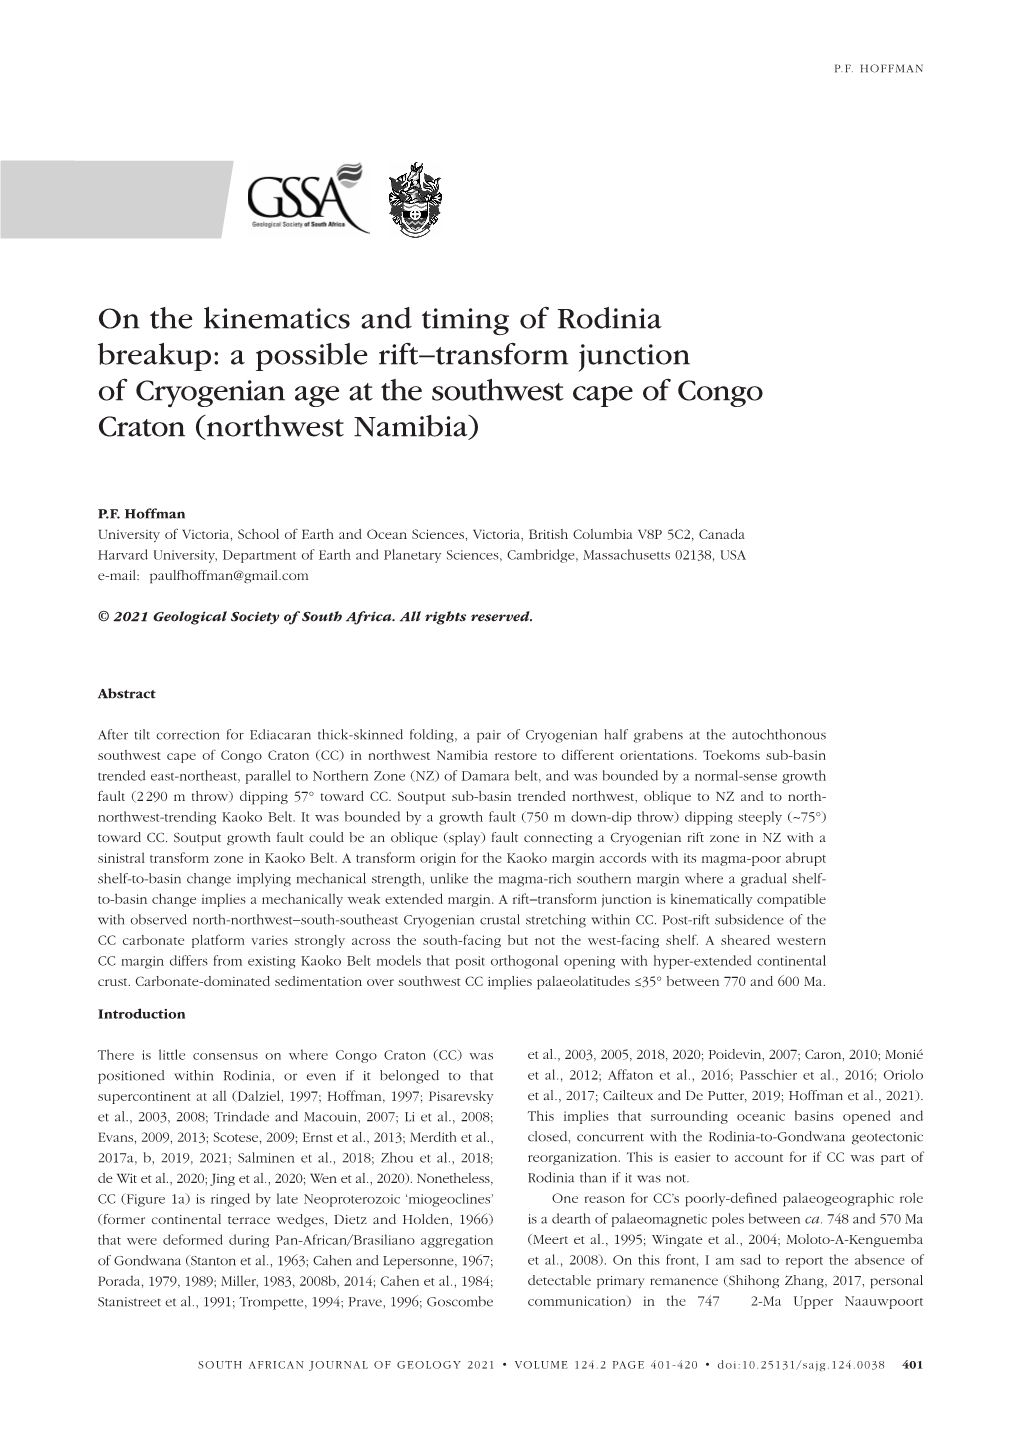 On the Kinematics and Timing of Rodinia Breakup: a Possible Rift−Transform Junction of Cryogenian Age at the Southwest Cape of Congo Craton (Northwest Namibia)